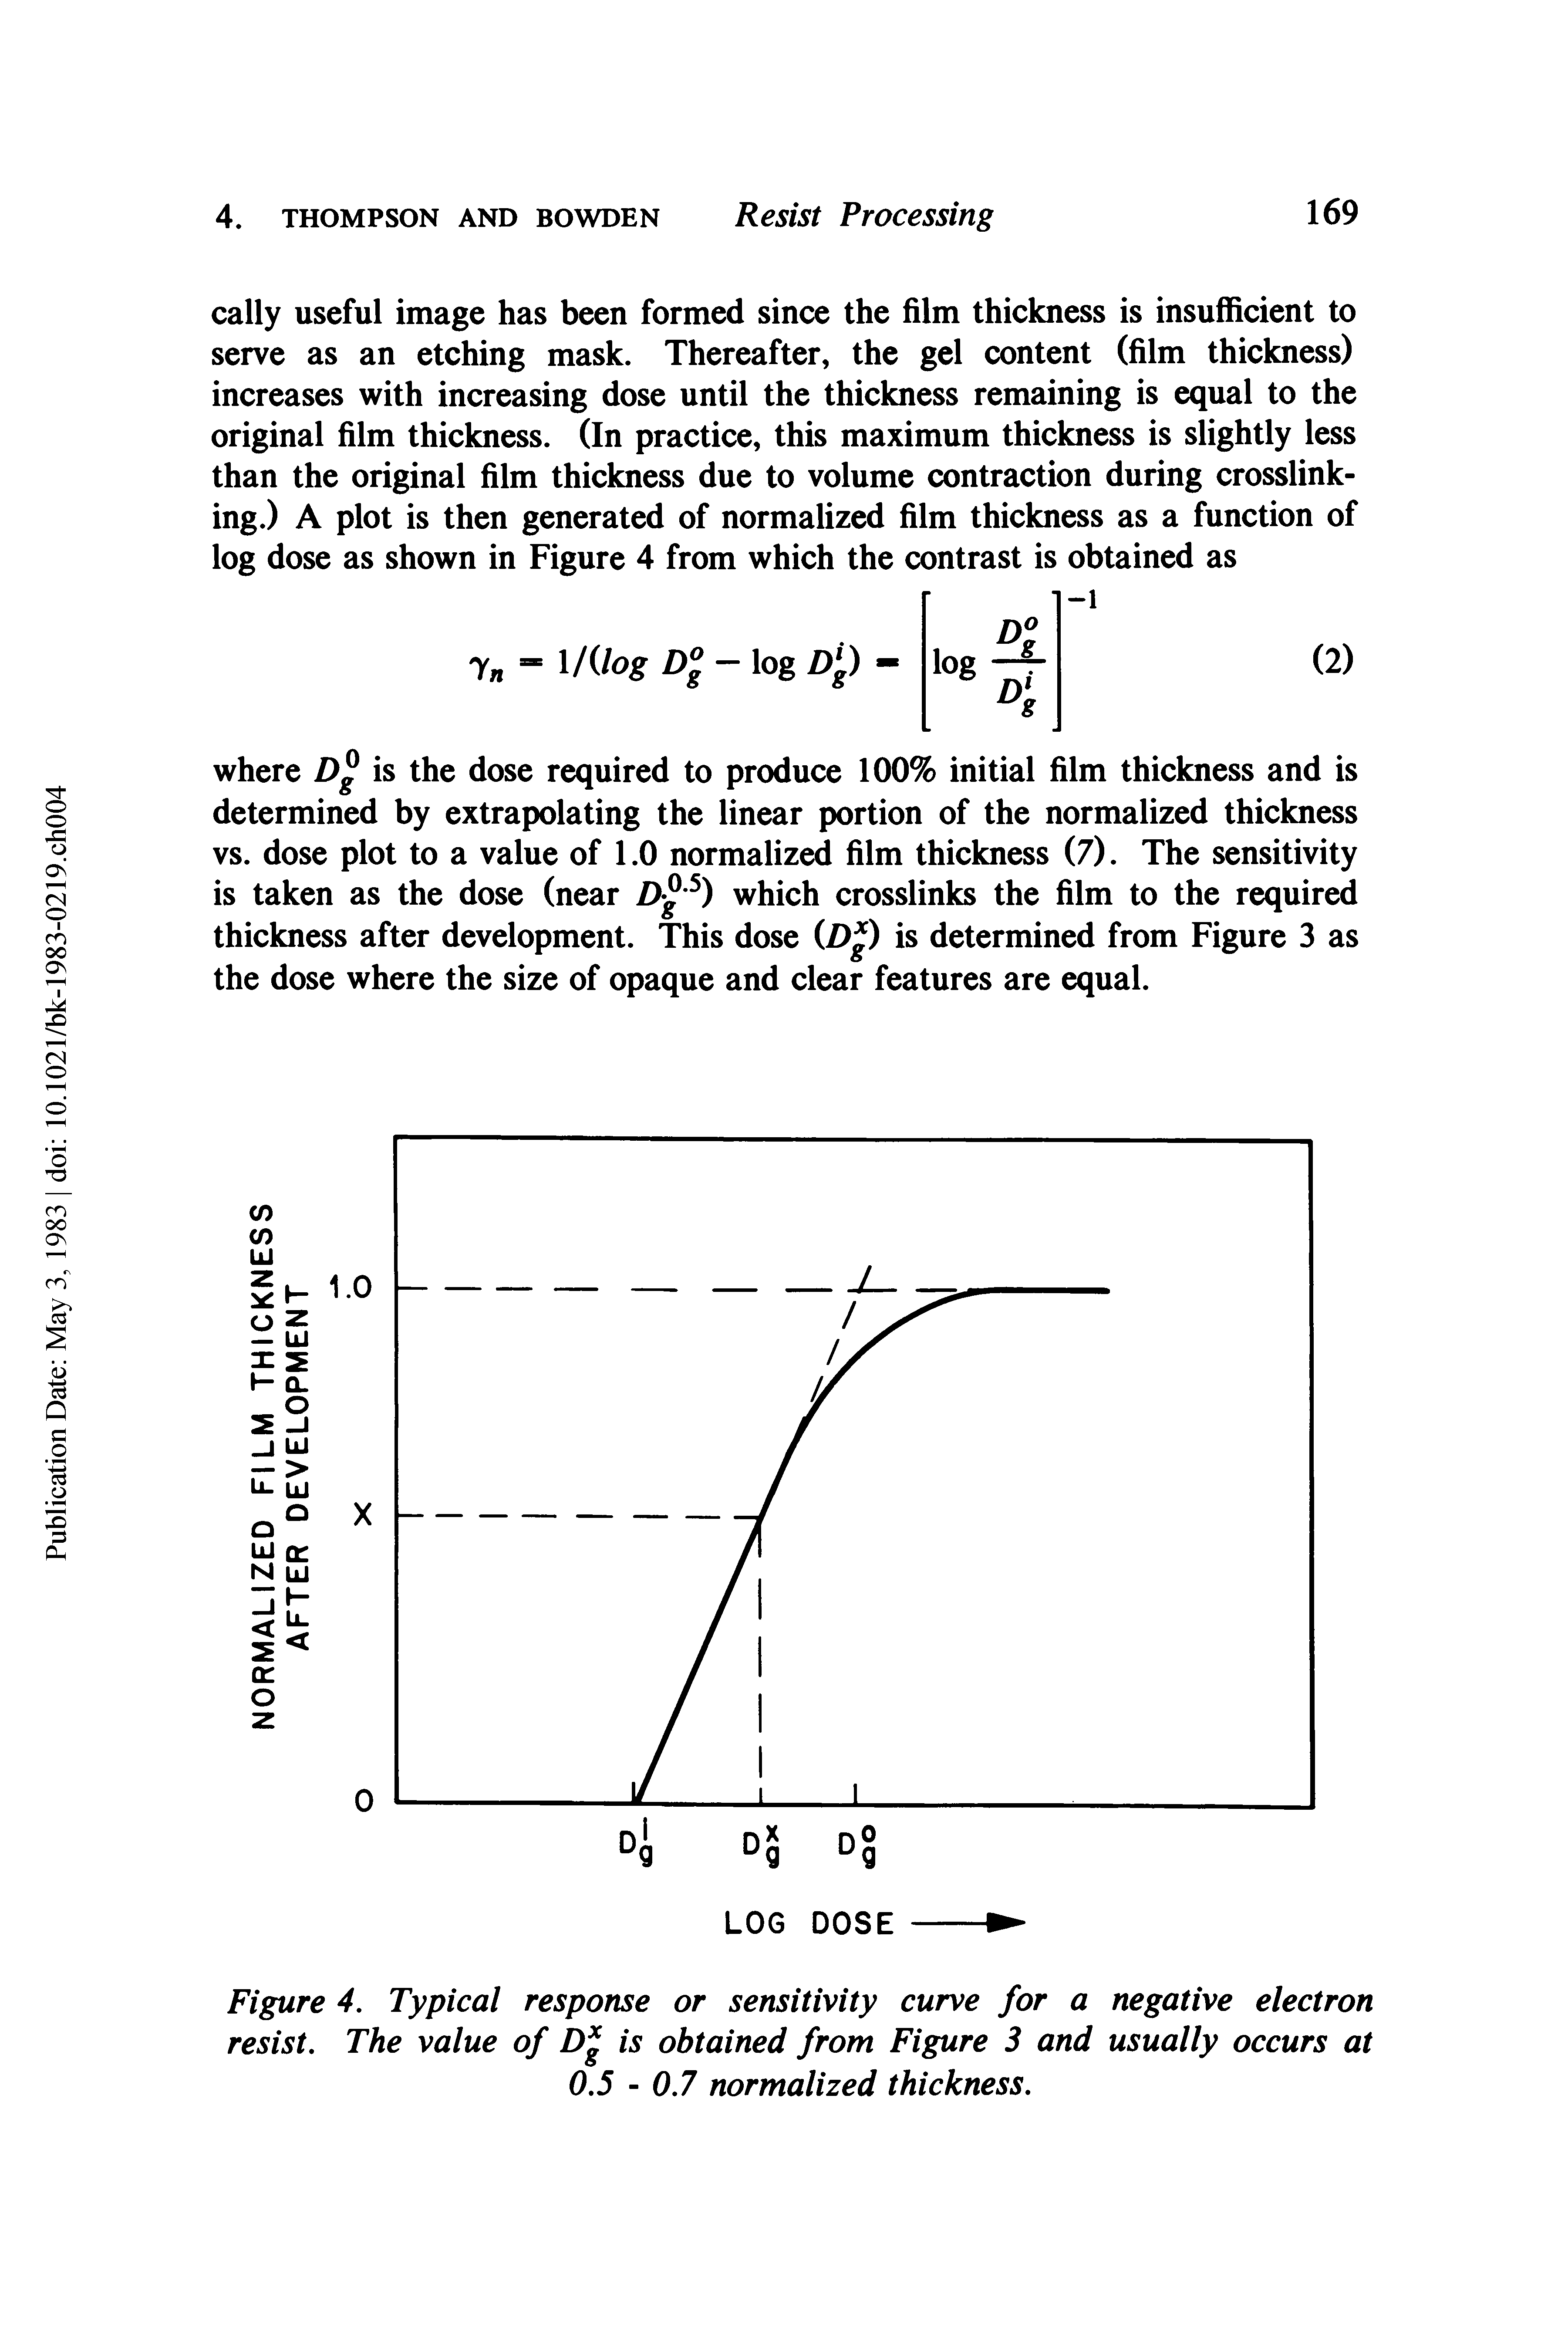 Figure 4. Typical response or sensitivity curve for a negative electron resist. The value of Dg is obtained from Figure 3 and usually occurs at 0.5 - 0.7 normalized thickness.